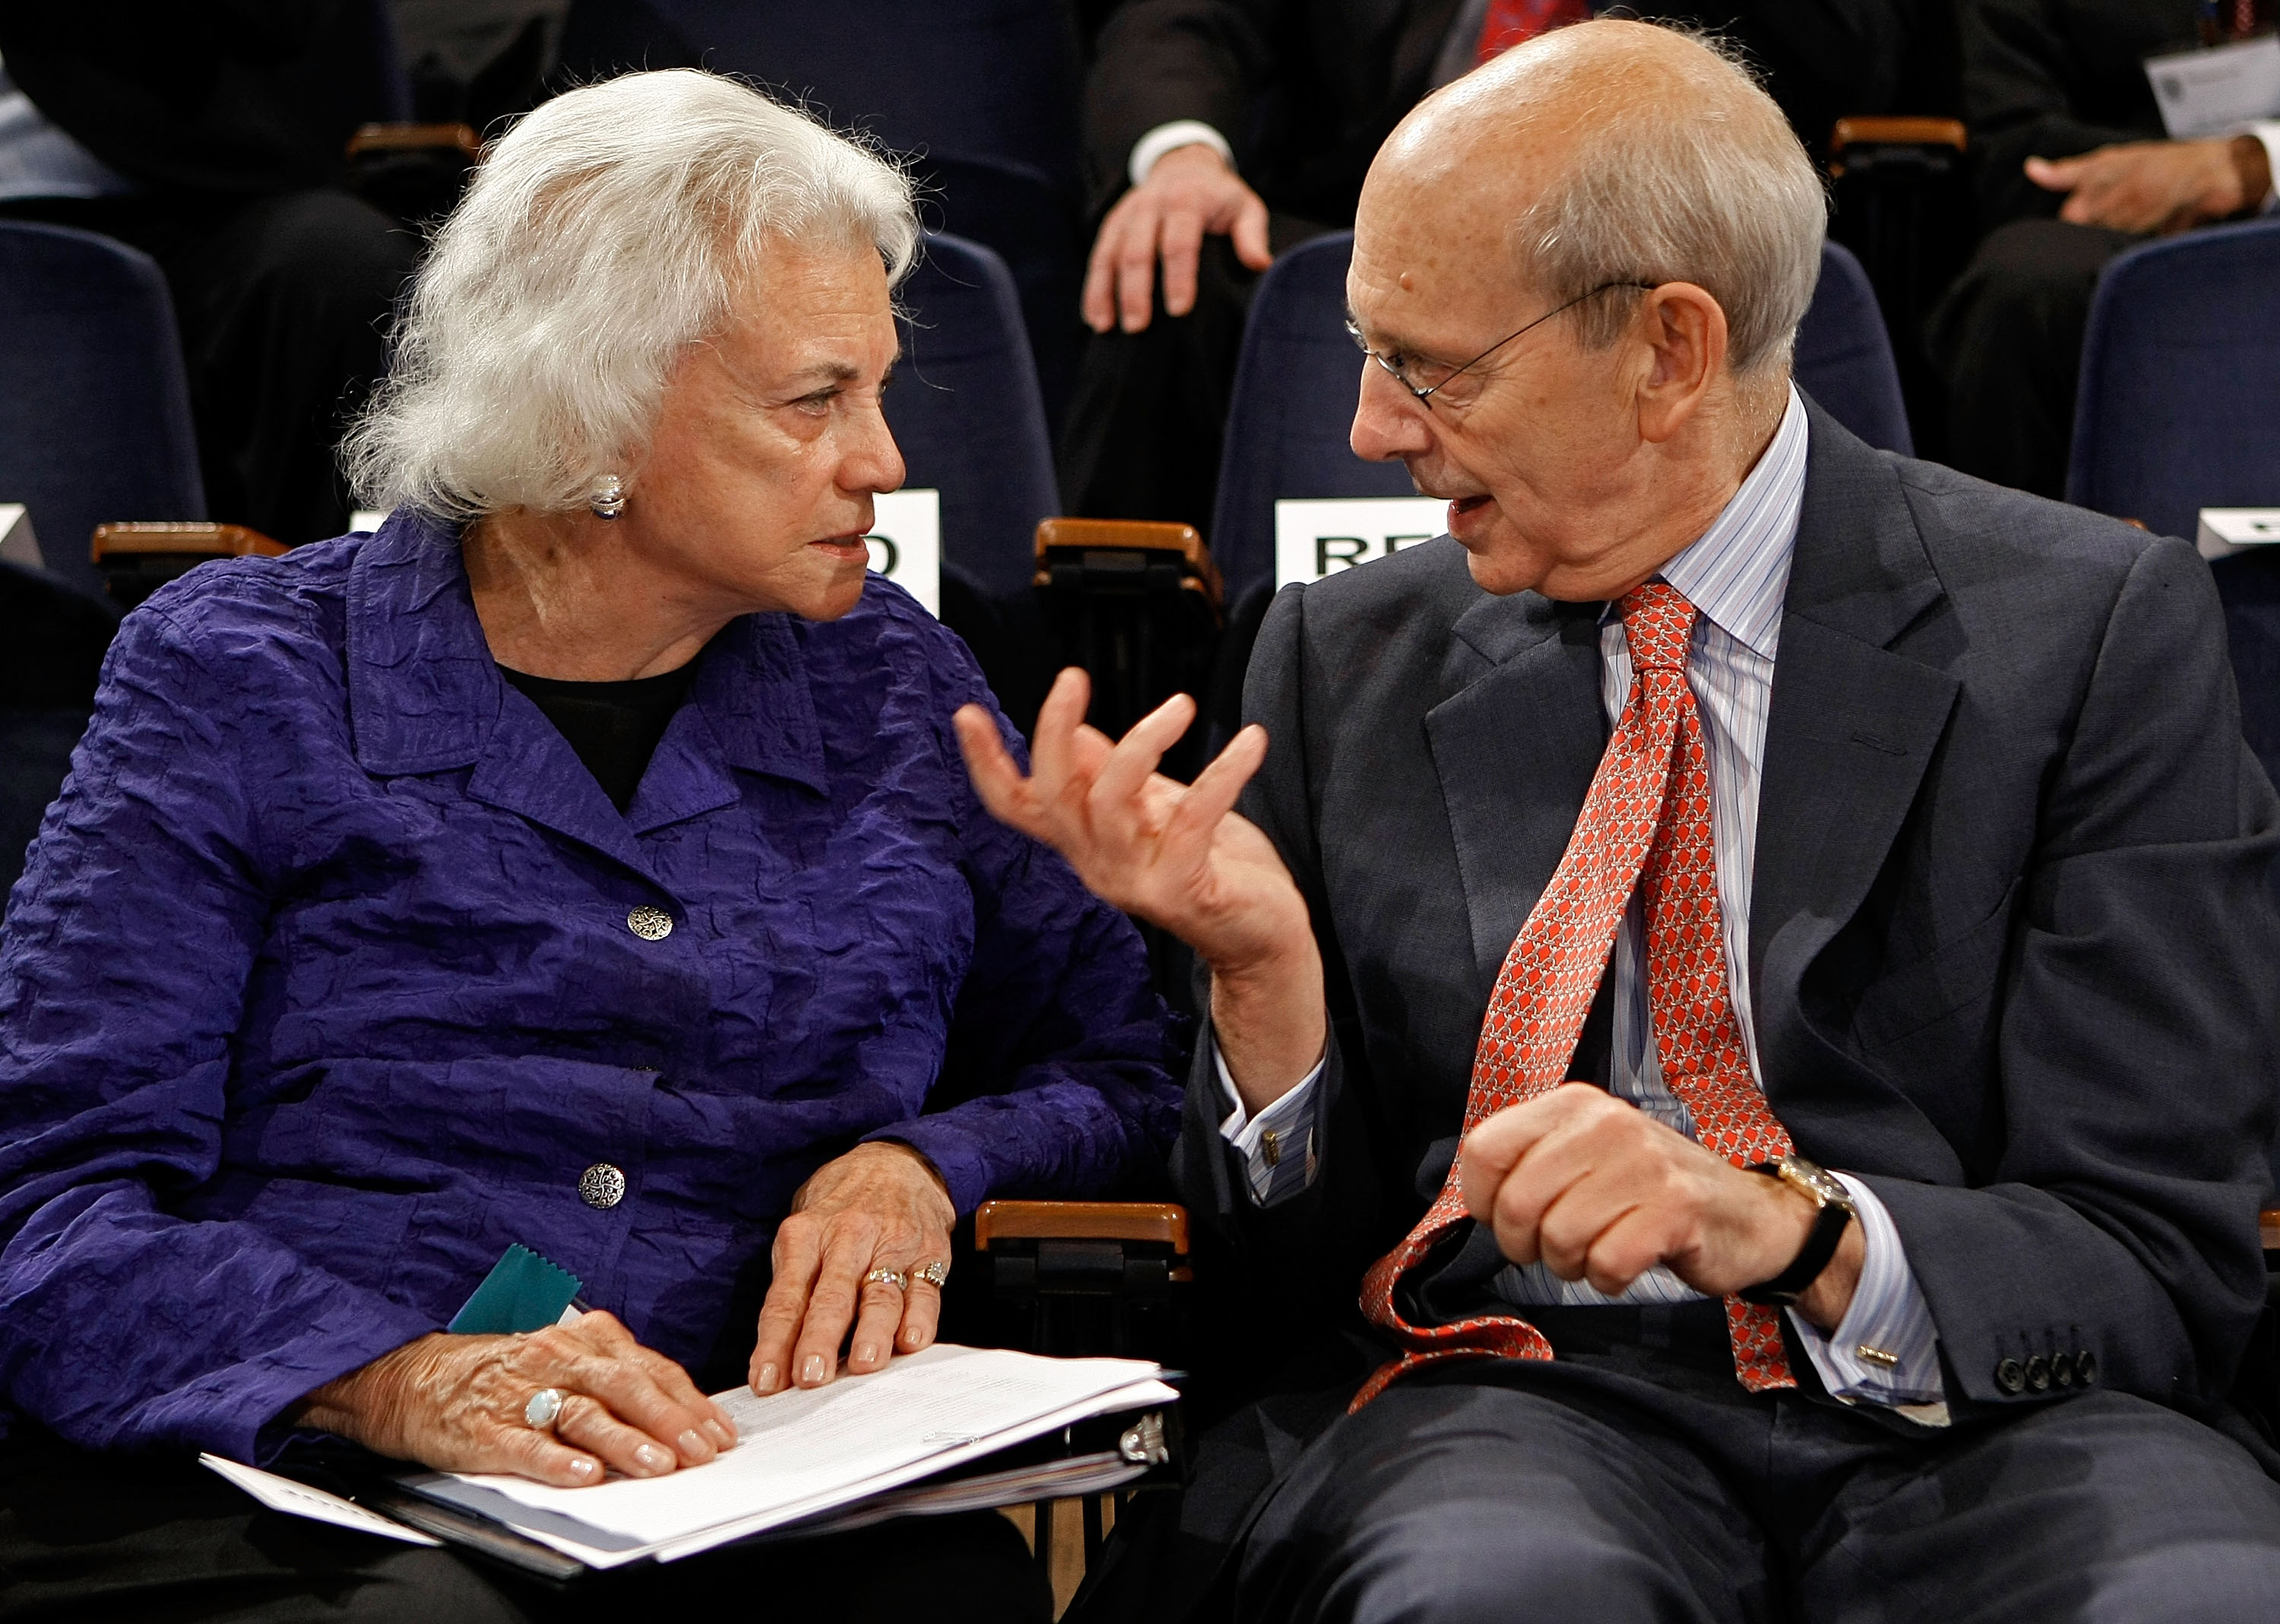 Justice Sandra Day O'Connor talks with Justice Stephen Breyer at Georgetown University Law Center on May 20, 2009 (Chip Somodevilla/Getty Images)